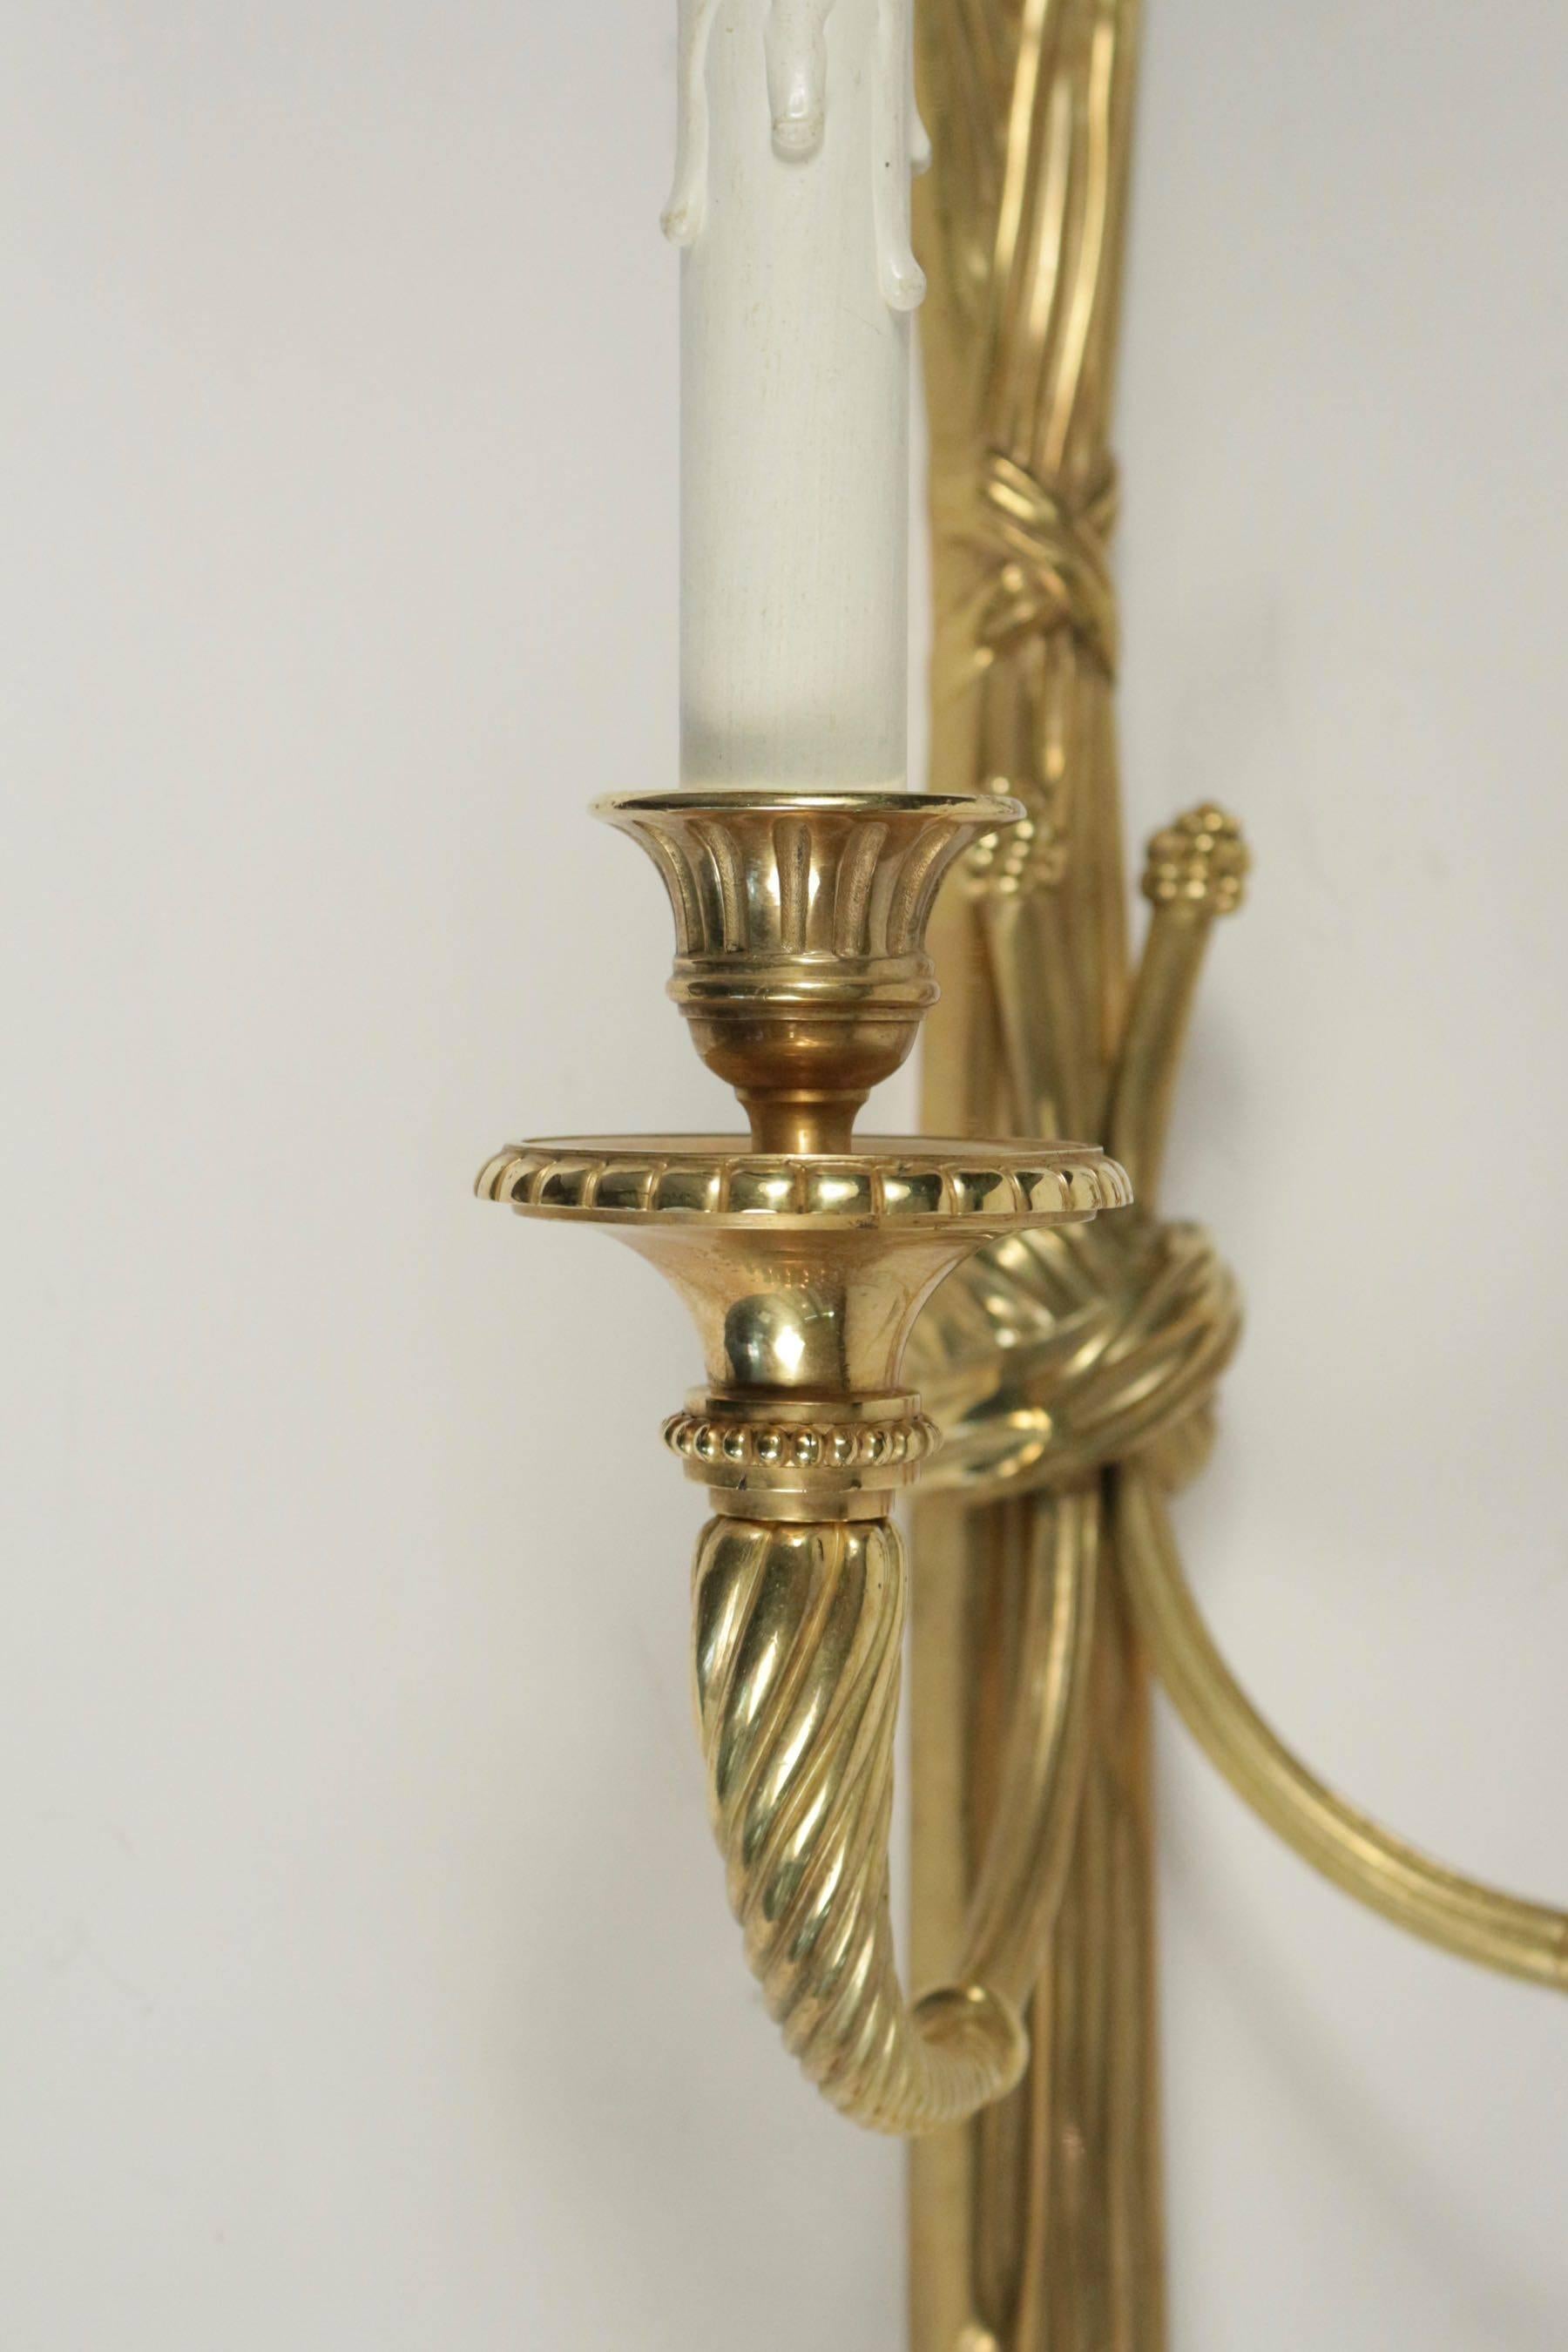 Gilt Important Pair of Sconces in the Style of Louis XVI from the 19th Century